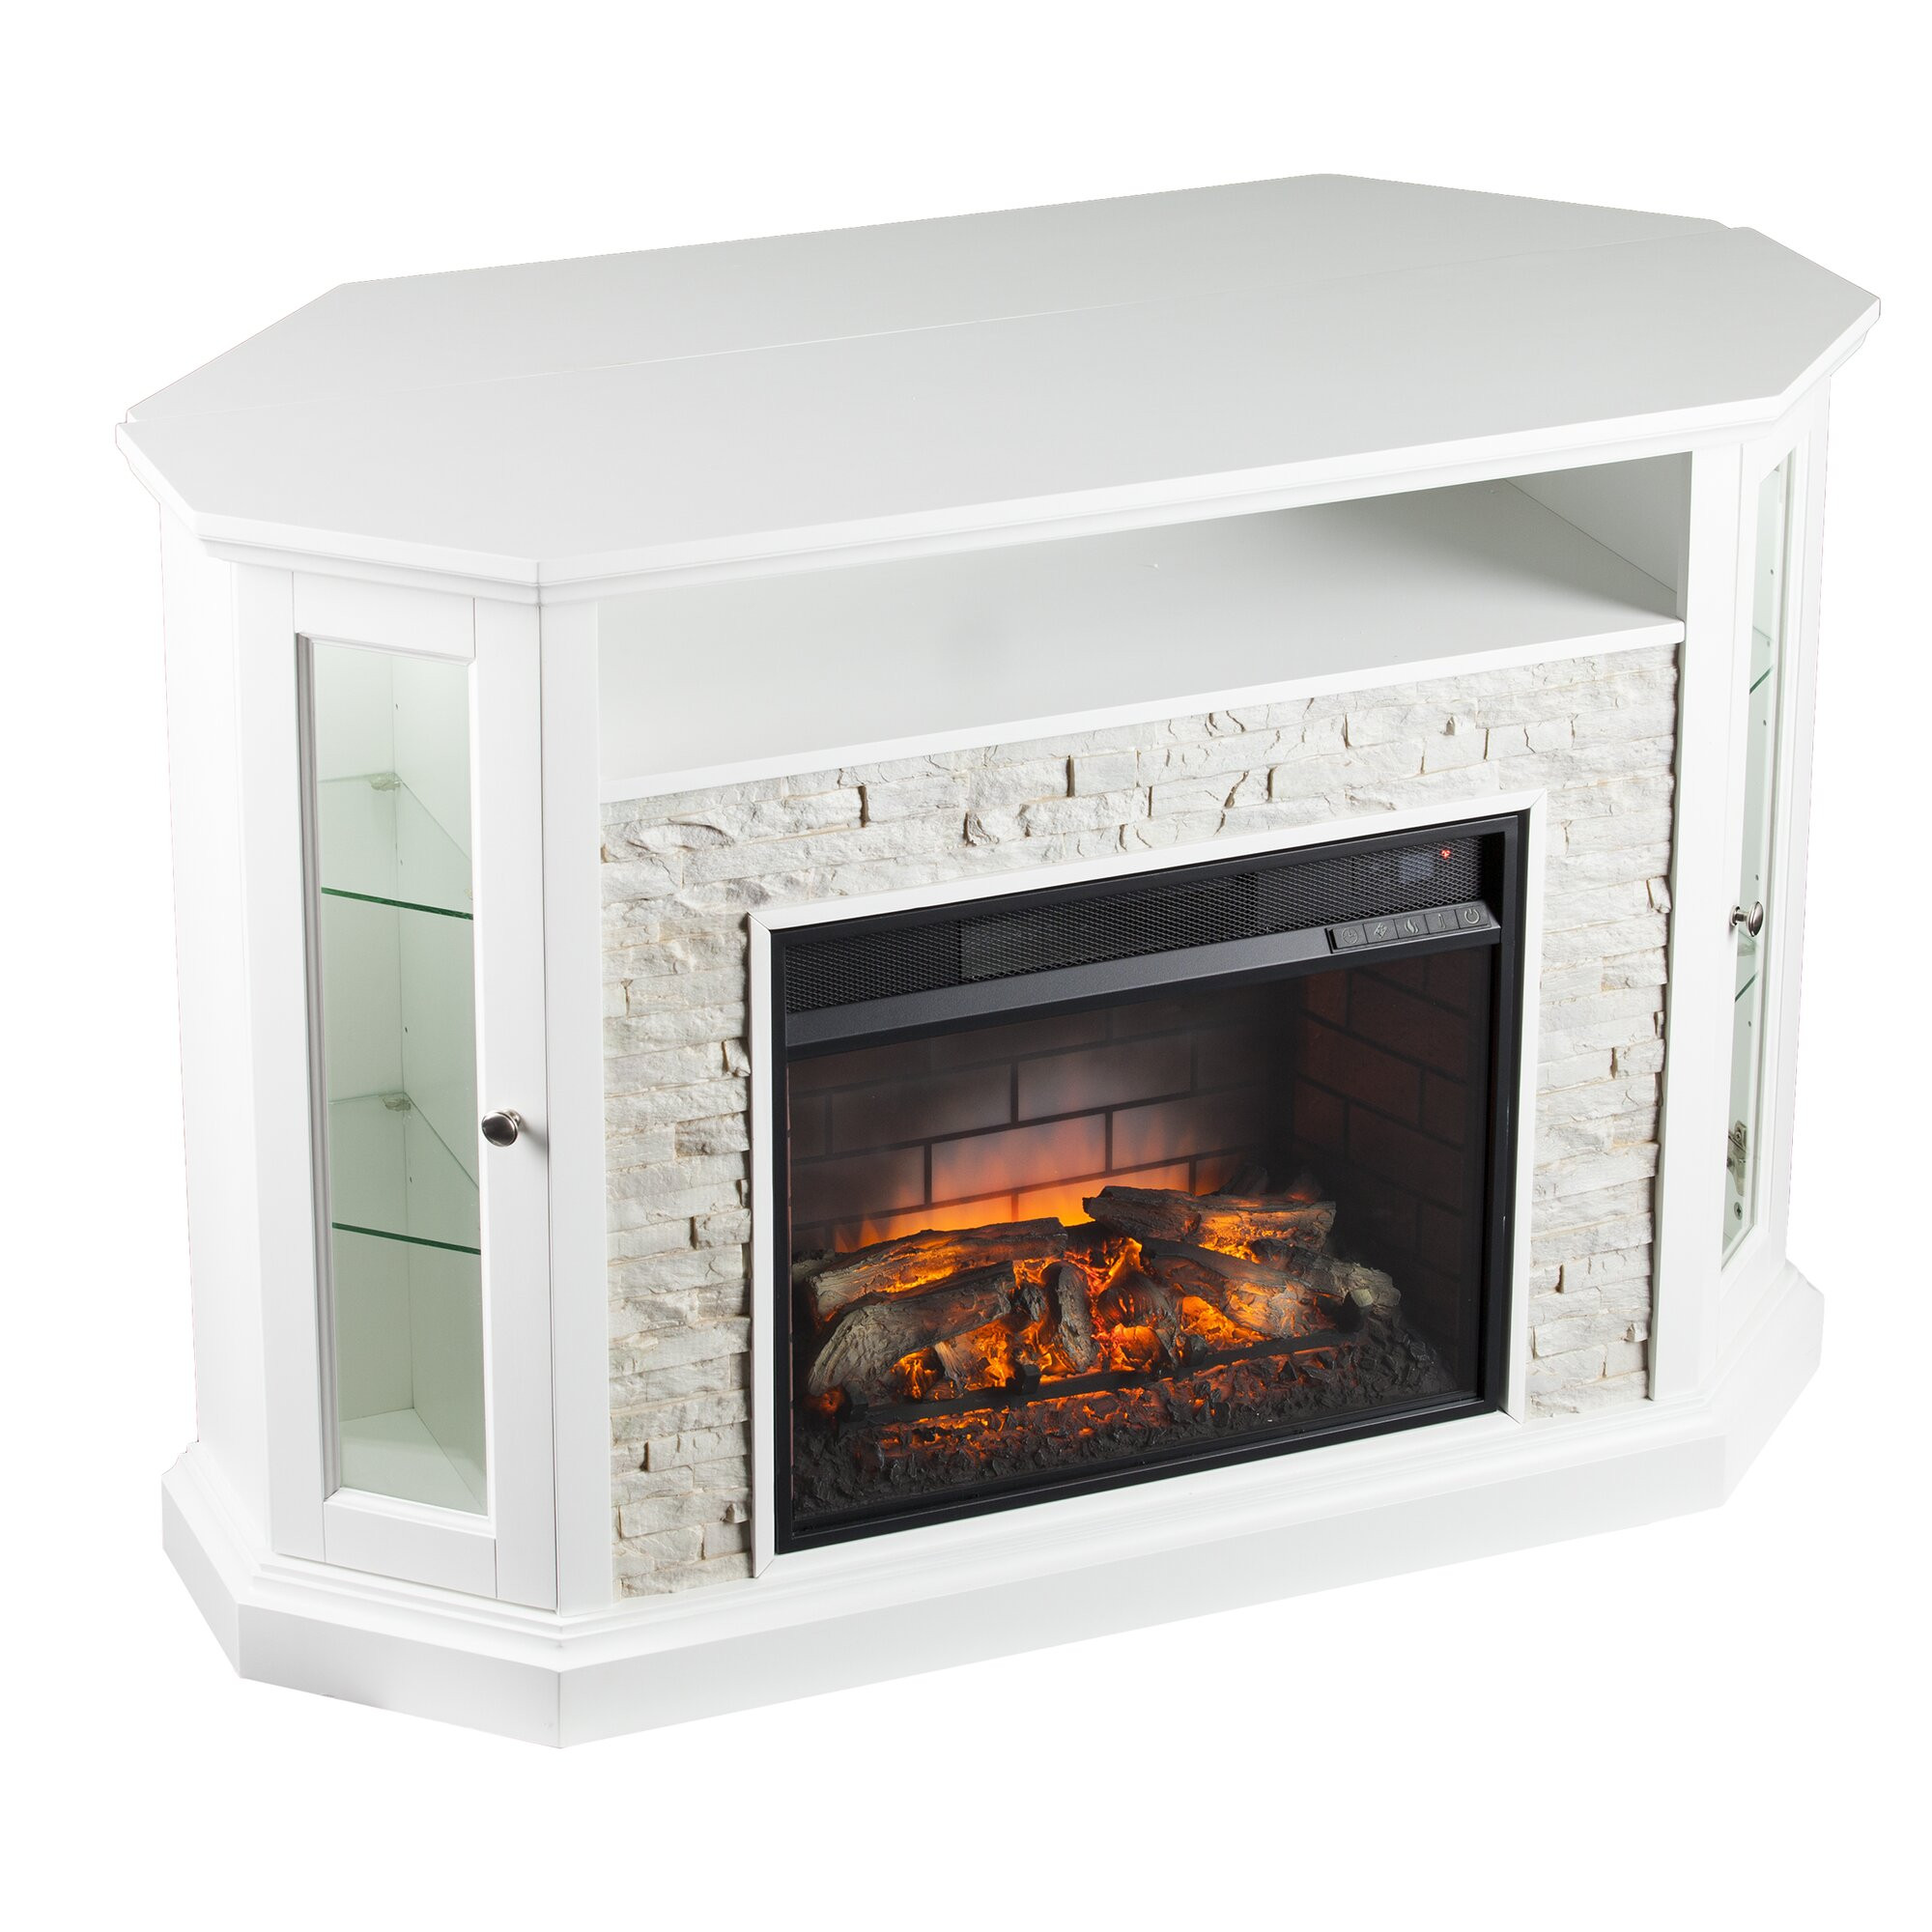 Corner Tv Stand Electric Fireplace
 Alcott Hill Montpelier Corner Convertible 50" TV Stand